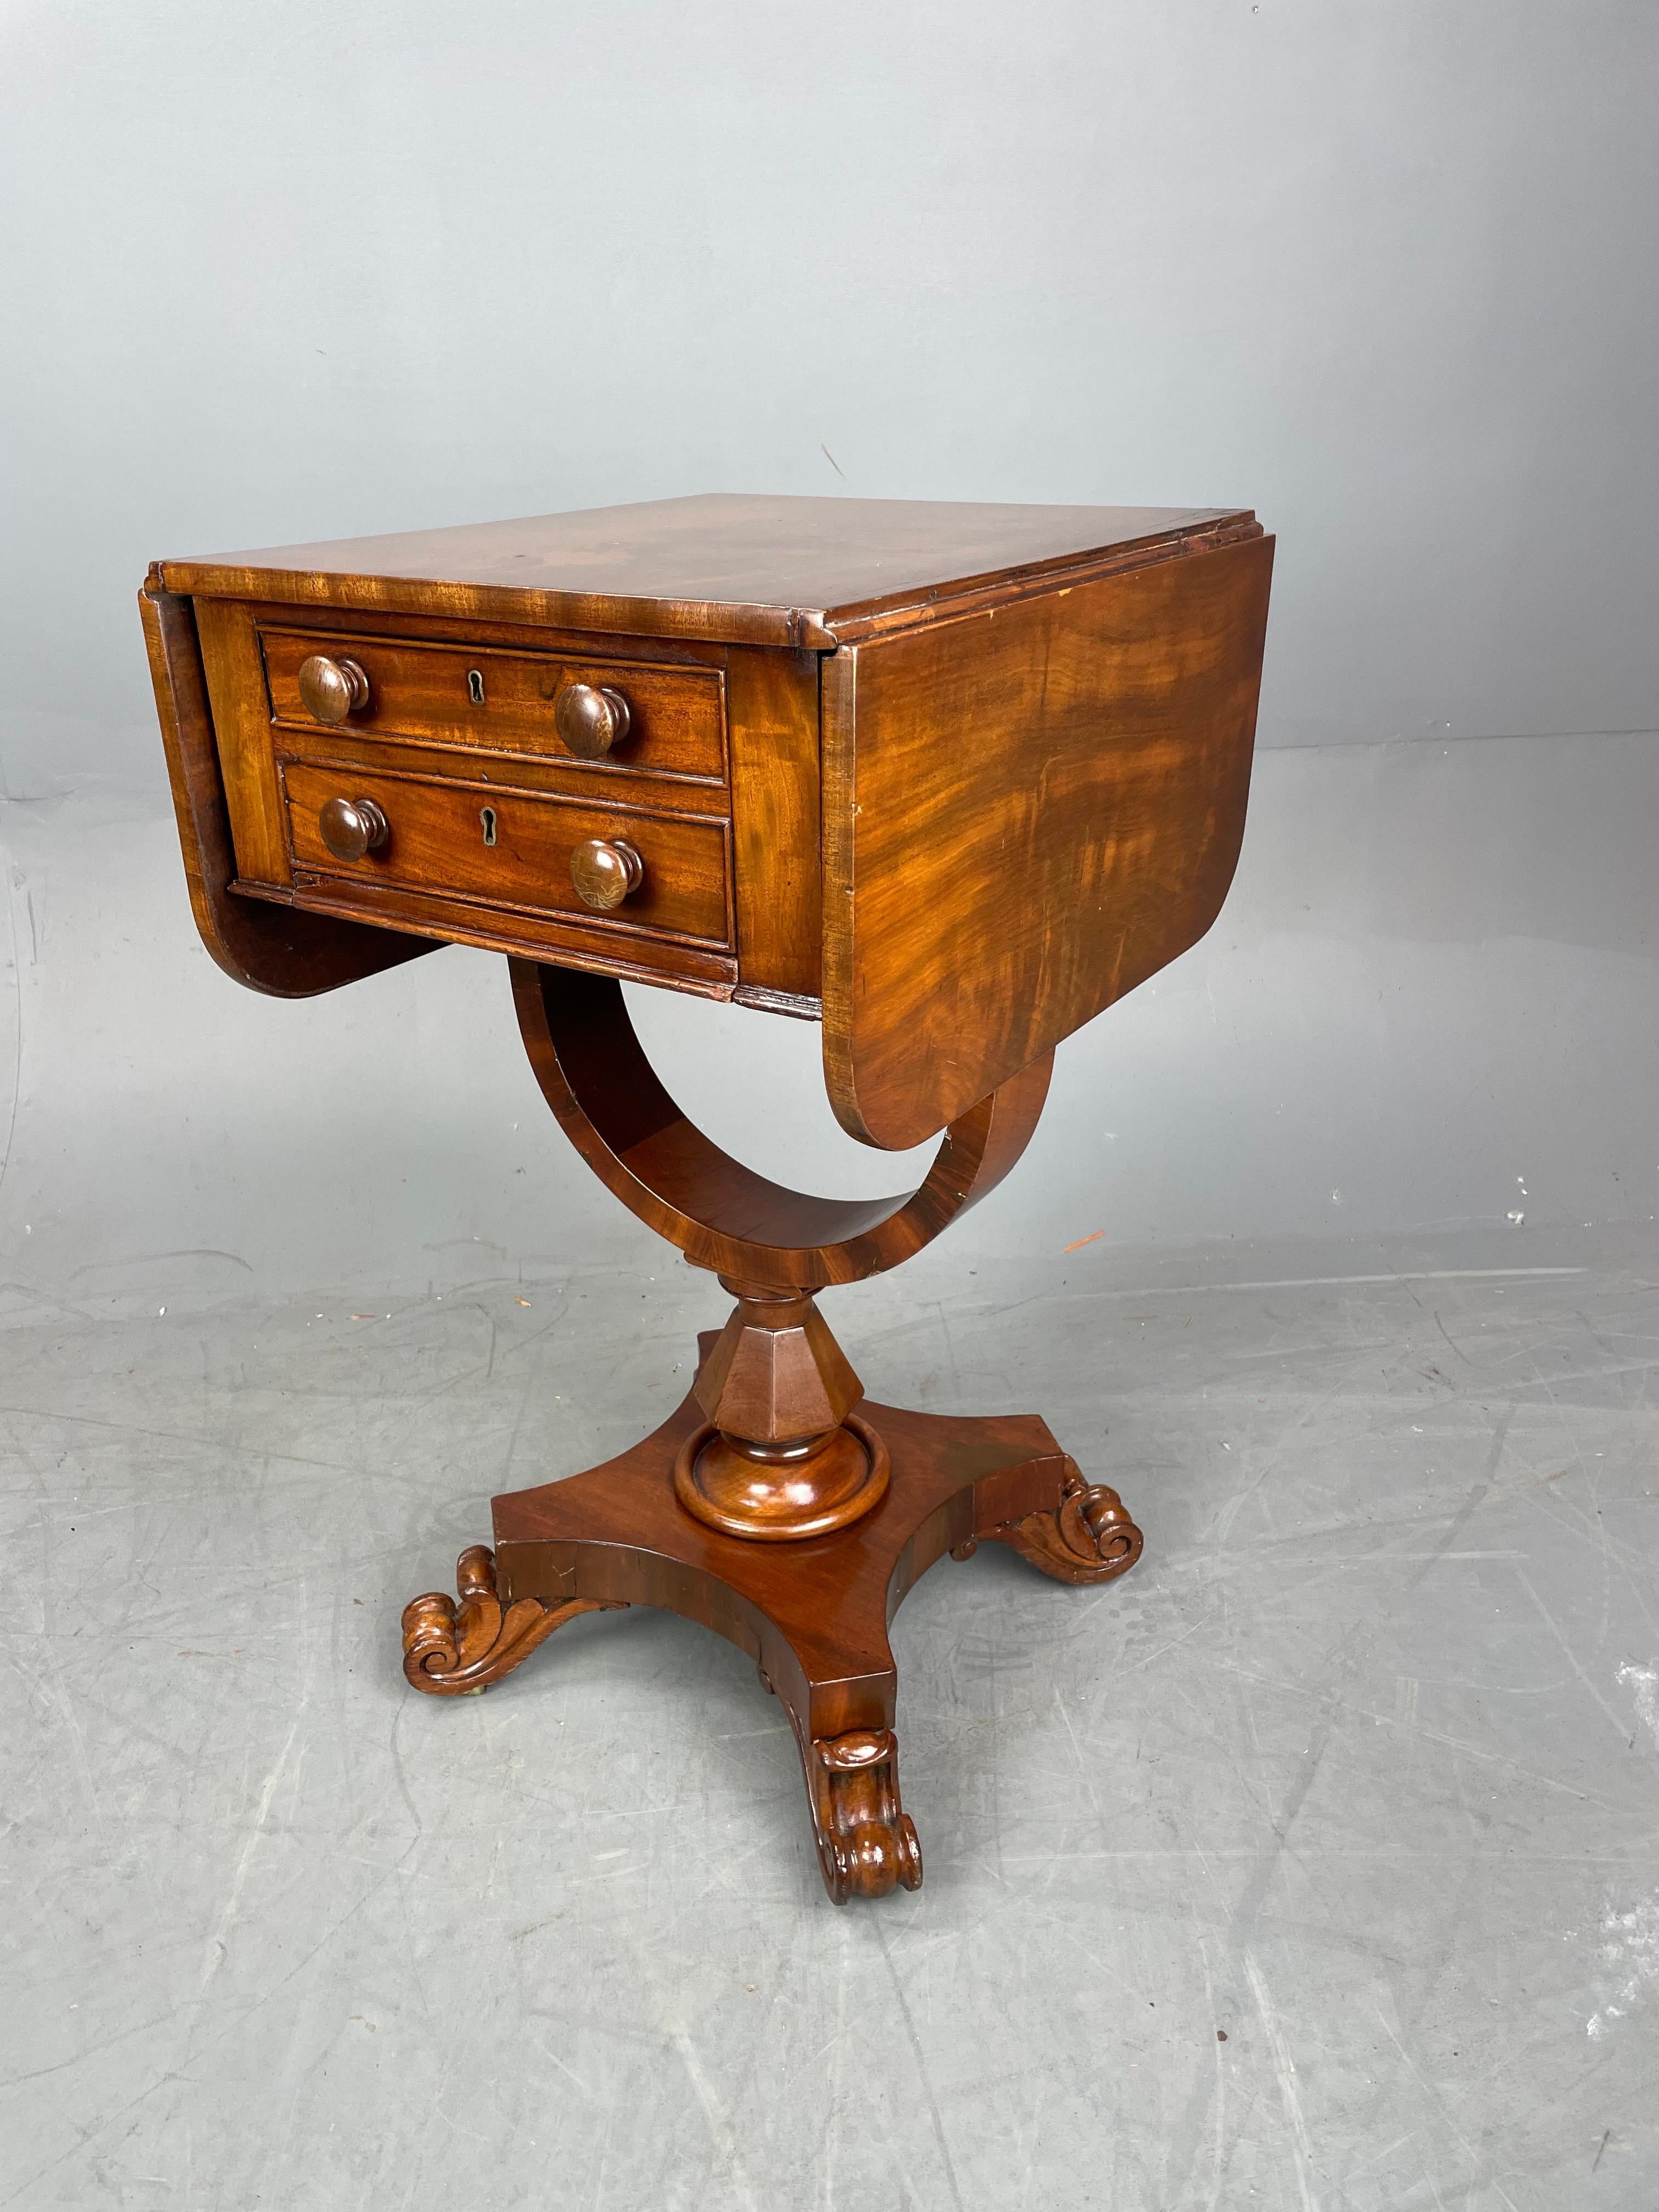 Fine Quality 19th century flame mahogany lamp end table circa 1840.
The table is a wonderful Size with two drop flaps and a single deep drawer. The depicting two drawers. To the opposing side there are two dummy drawers.
The top stands on a very